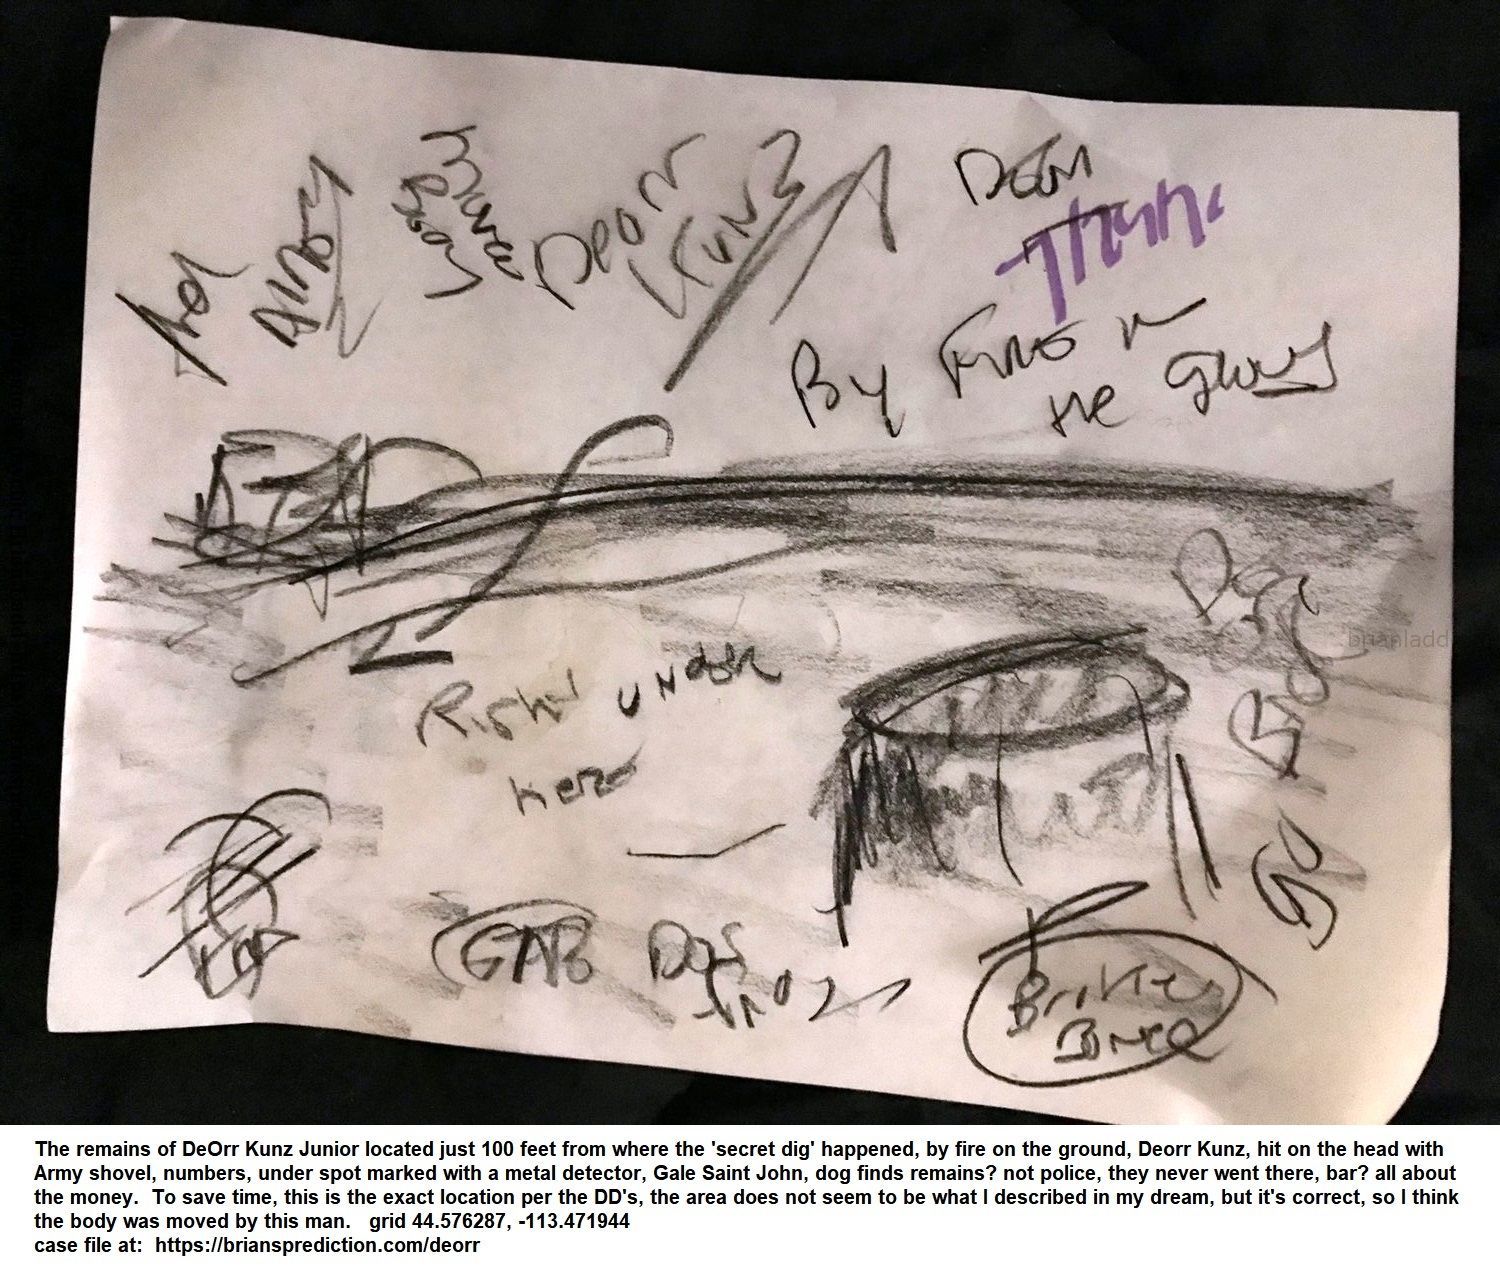 13371 24 July 2020 2 - From 3 Dream Drawing Dated July 24th, 2020  The Remains Of Deorr Kunz Junior Located Just 100 Fee...
From 3 Dream Drawing Dated July 24th, 2020  The Remains Of Deorr Kunz Junior Located Just 100 Feet From Where The 'secret Dig' Happened, By Fire On The Ground, Deorr Kunz, Hit On The Head With Army Shovel, Numbers, Under Spot Marked With A Metal Detector, Gale Saint John, Dog Finds Remains? Not Police, They Never Went There, Bar? All About The Money.  To Save Time, This Is The Exact Location Per The Dd'S, The Area Does Not Seem To Be What I Described In My Dream, But It'S Correct, So I Think The Body Was Moved By This Man.  Grid 44.576287, -113.471944  Case File At:   https://briansprediction.com/Deorr
